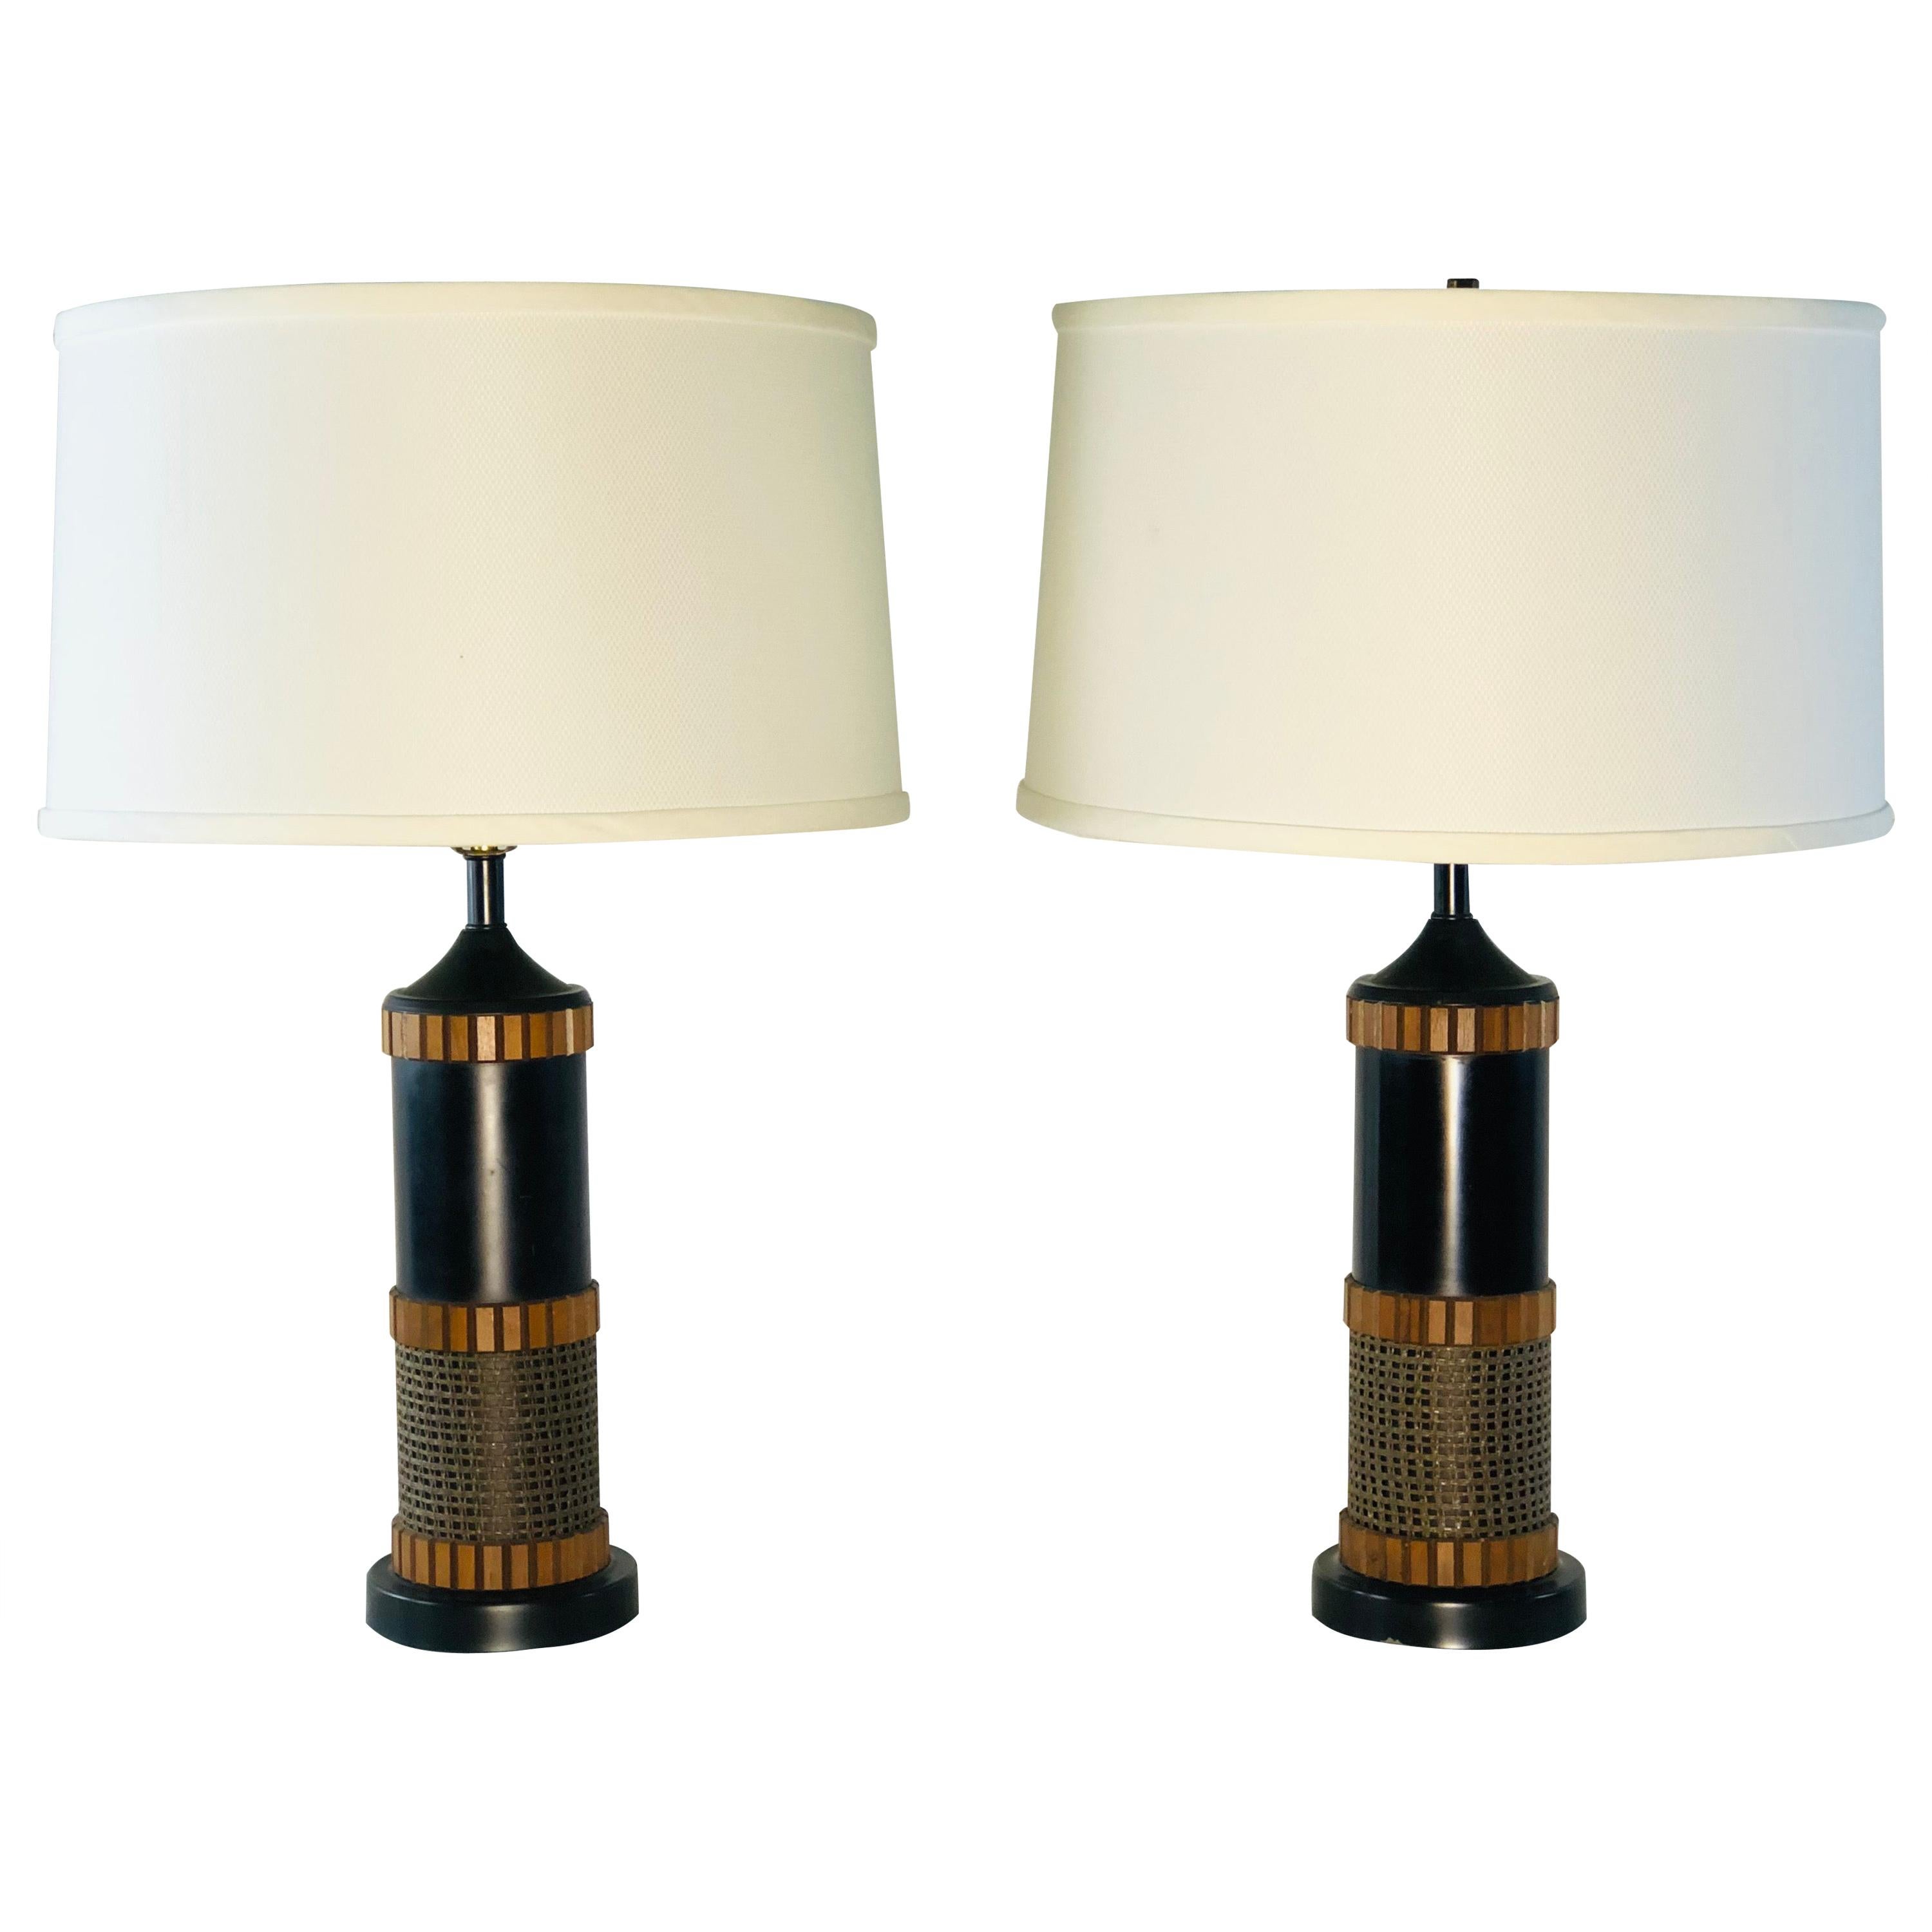 1960s Wood and Burlap Style Table Lamps, Pair For Sale